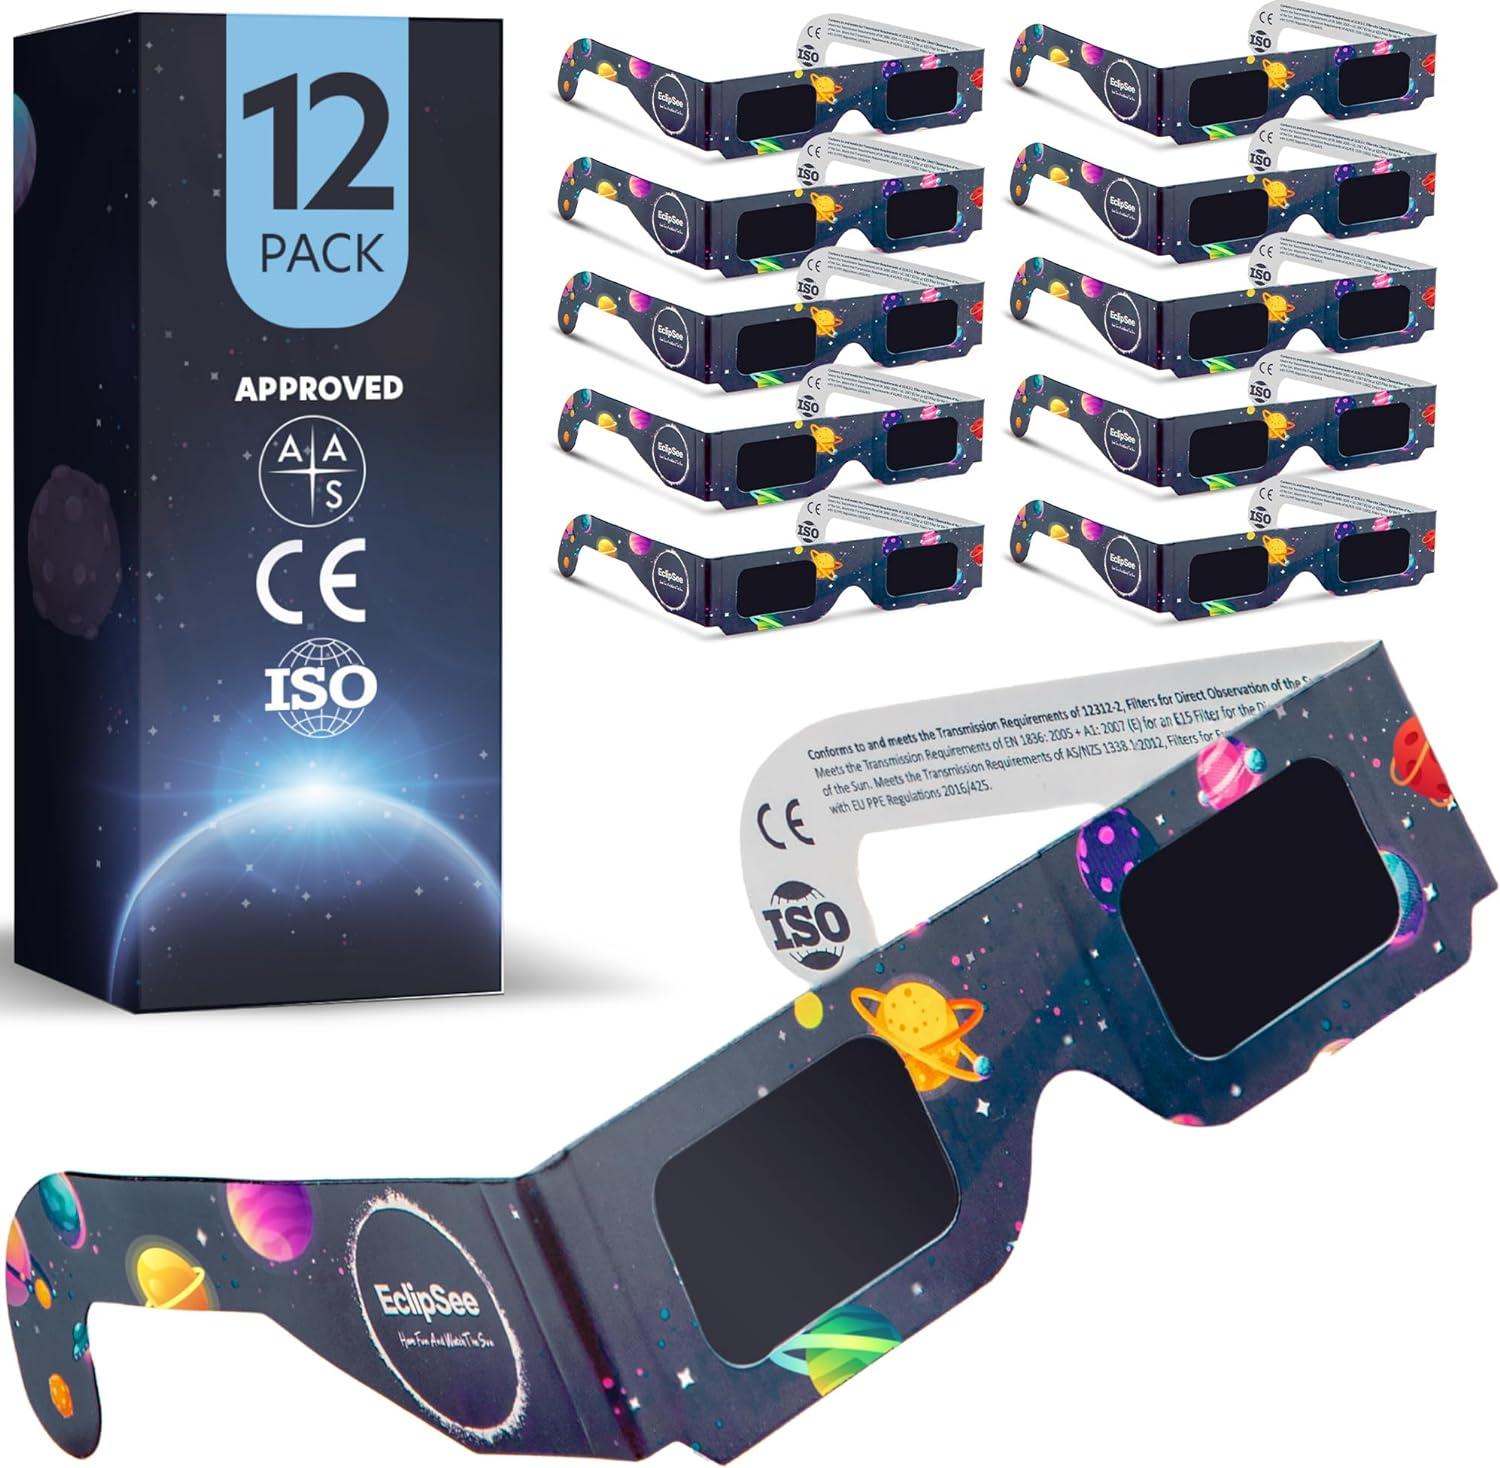 EclipSee Solar Eclipse Glasses 12 Pack for $6.99